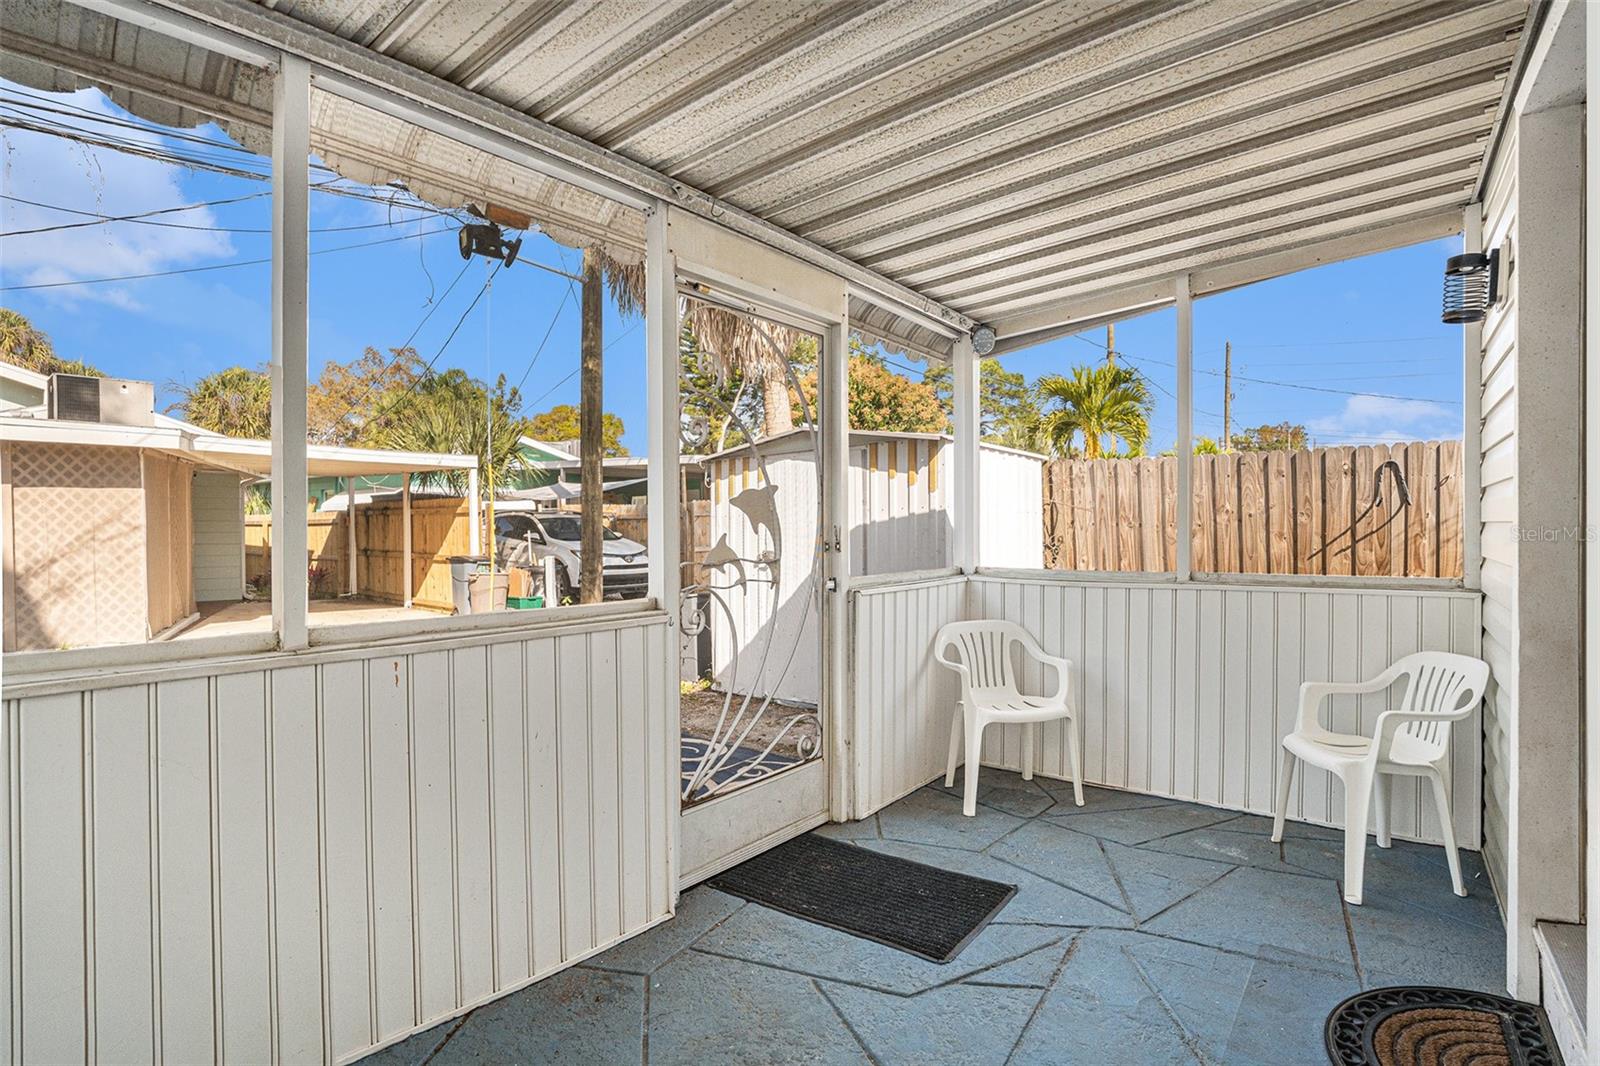 Look at this cute rear screen porch! Just add some cool patio lights and a comfy couch and you got a great place to nap and lounge!